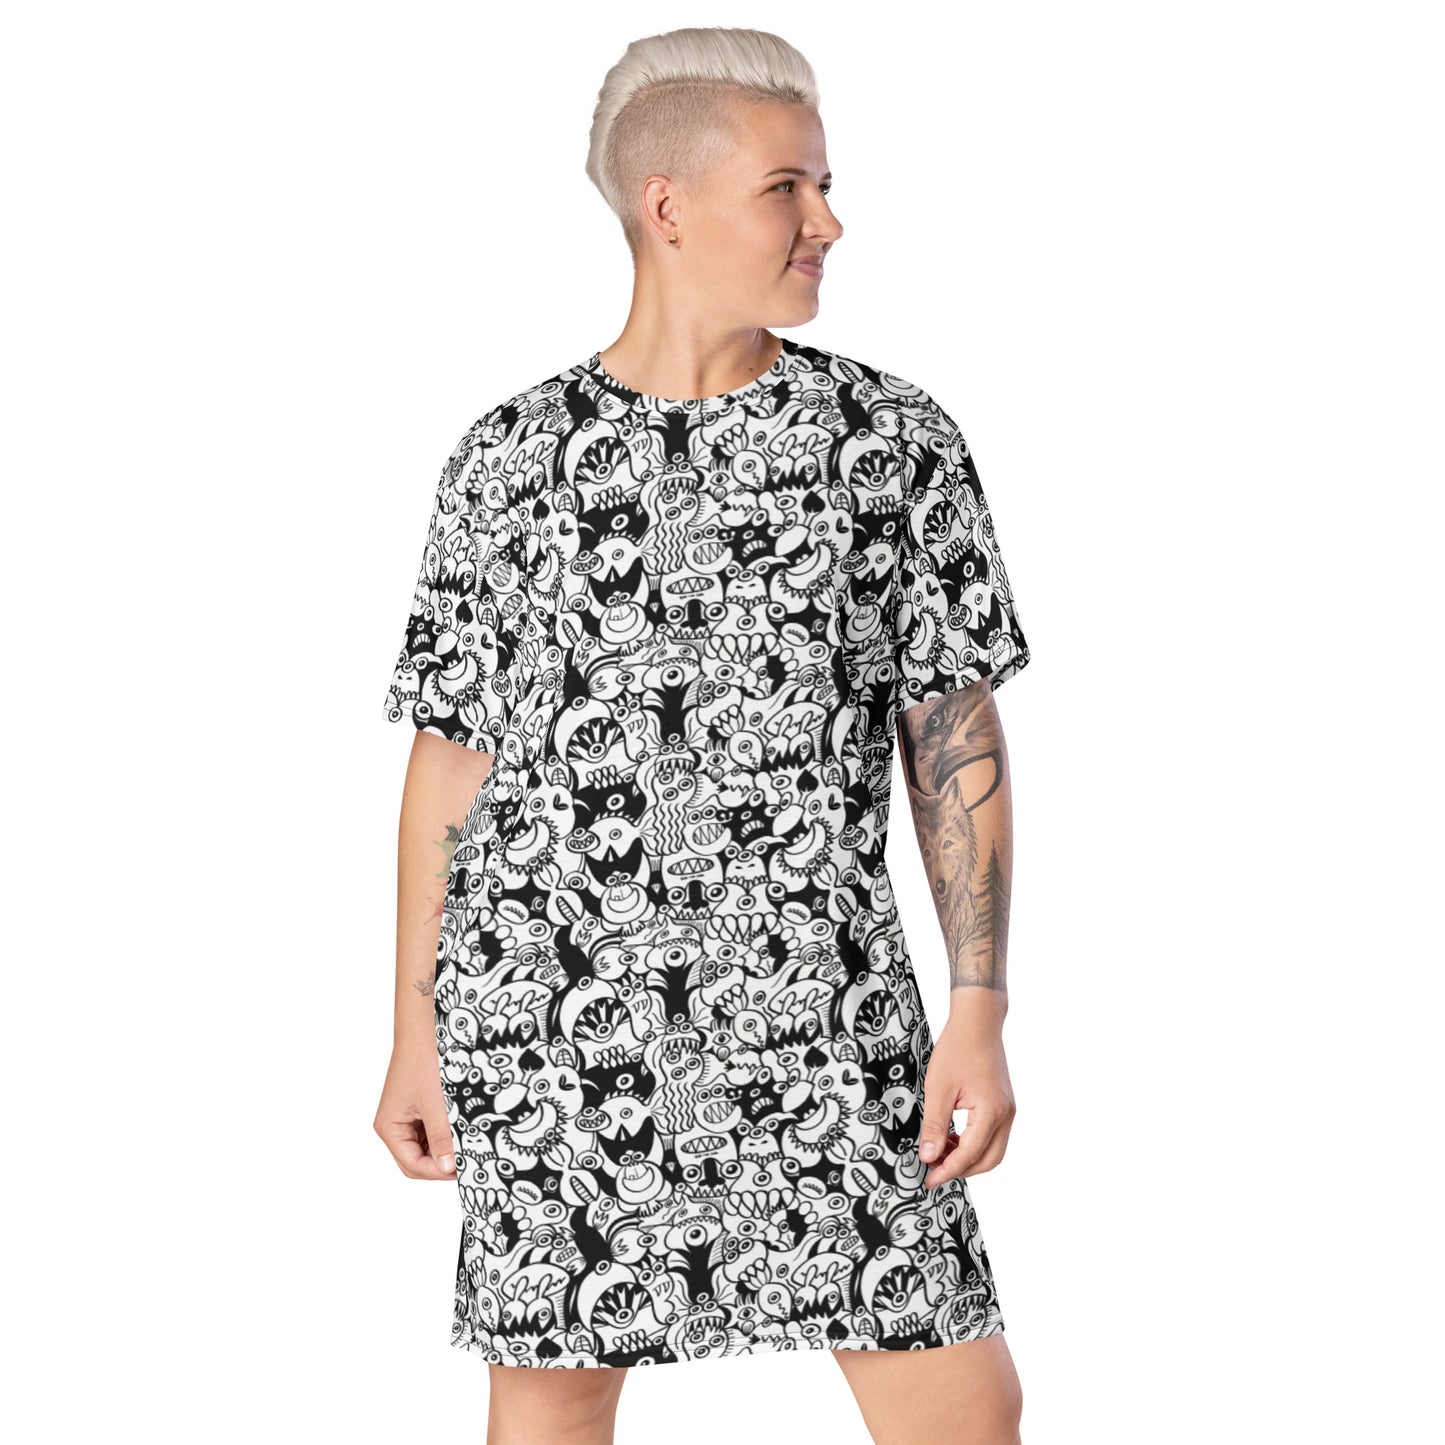 Black and white cool doodles art All-over print T-shirt dress. Front view